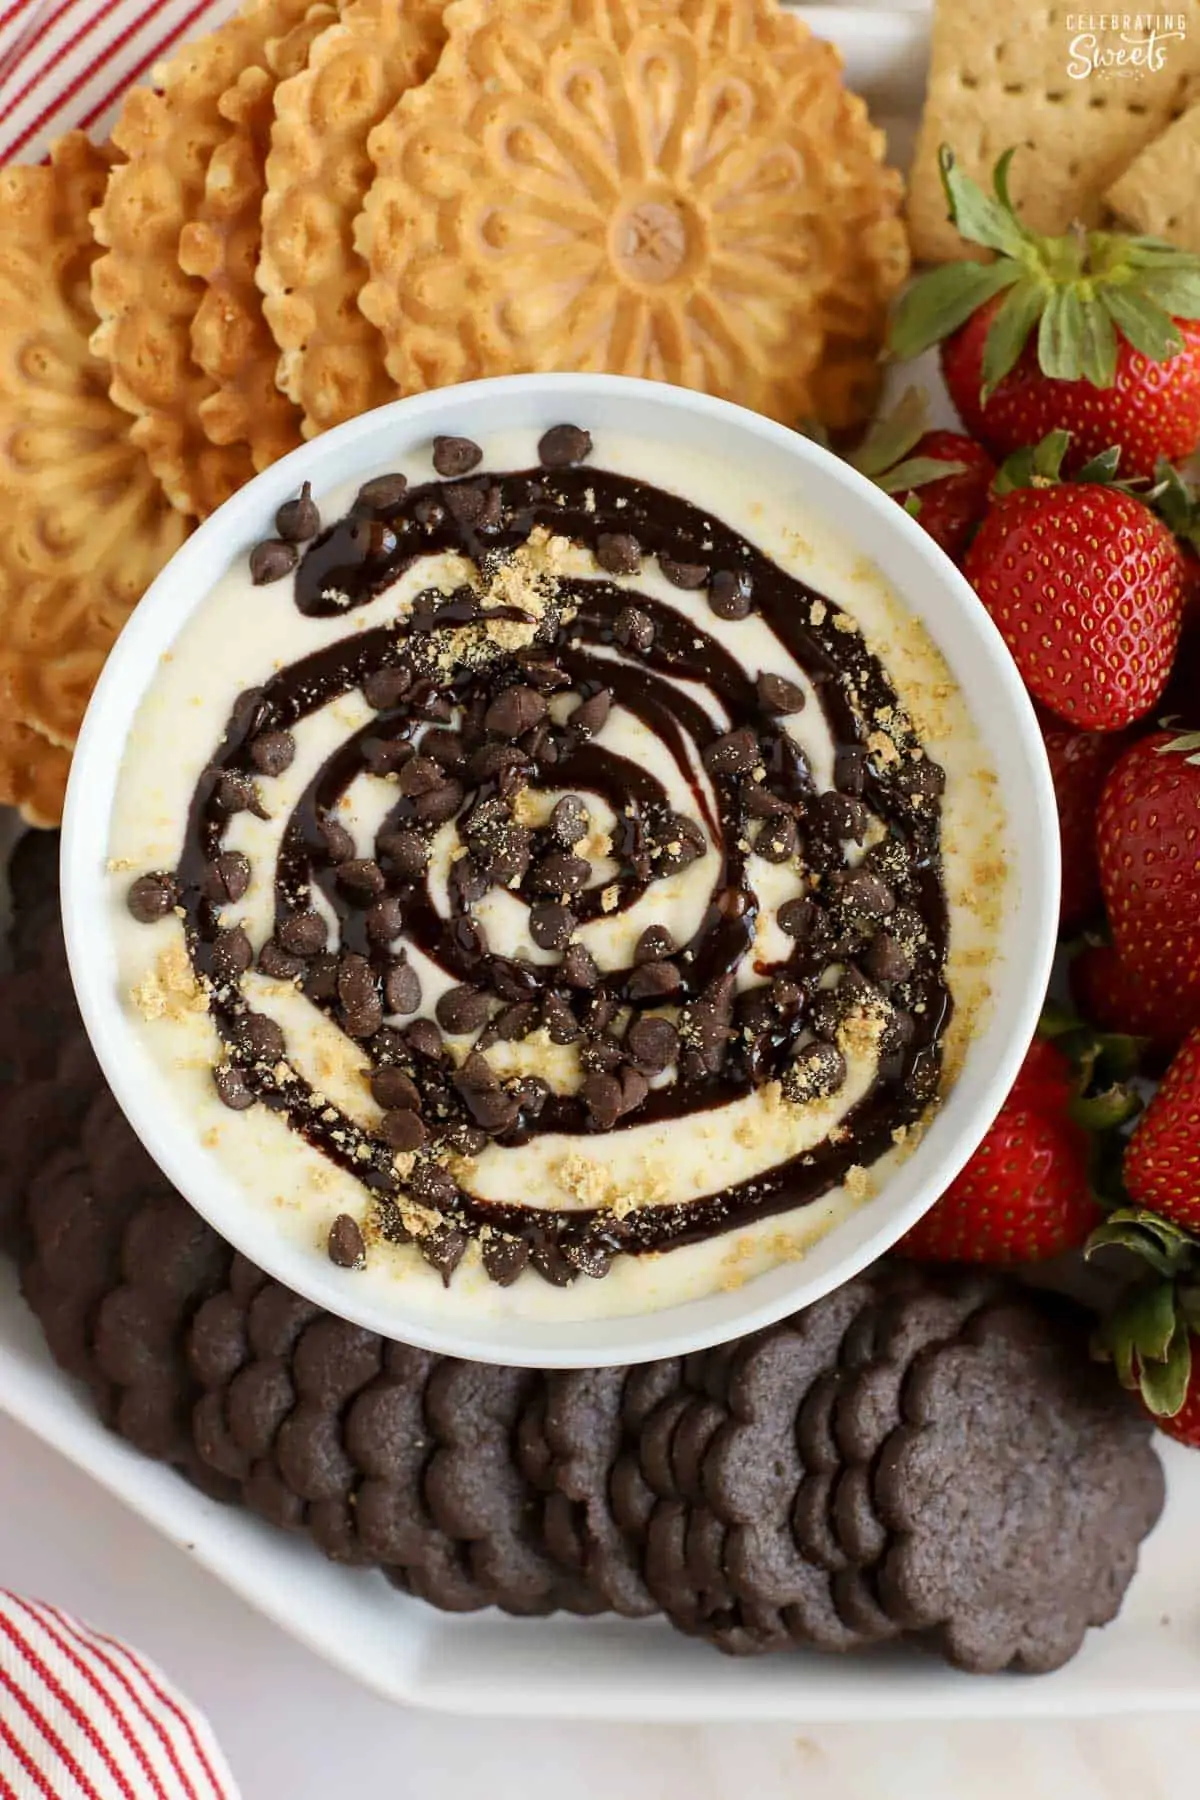 Cheesecake dip topped with chocolate swirls and chocolate chips